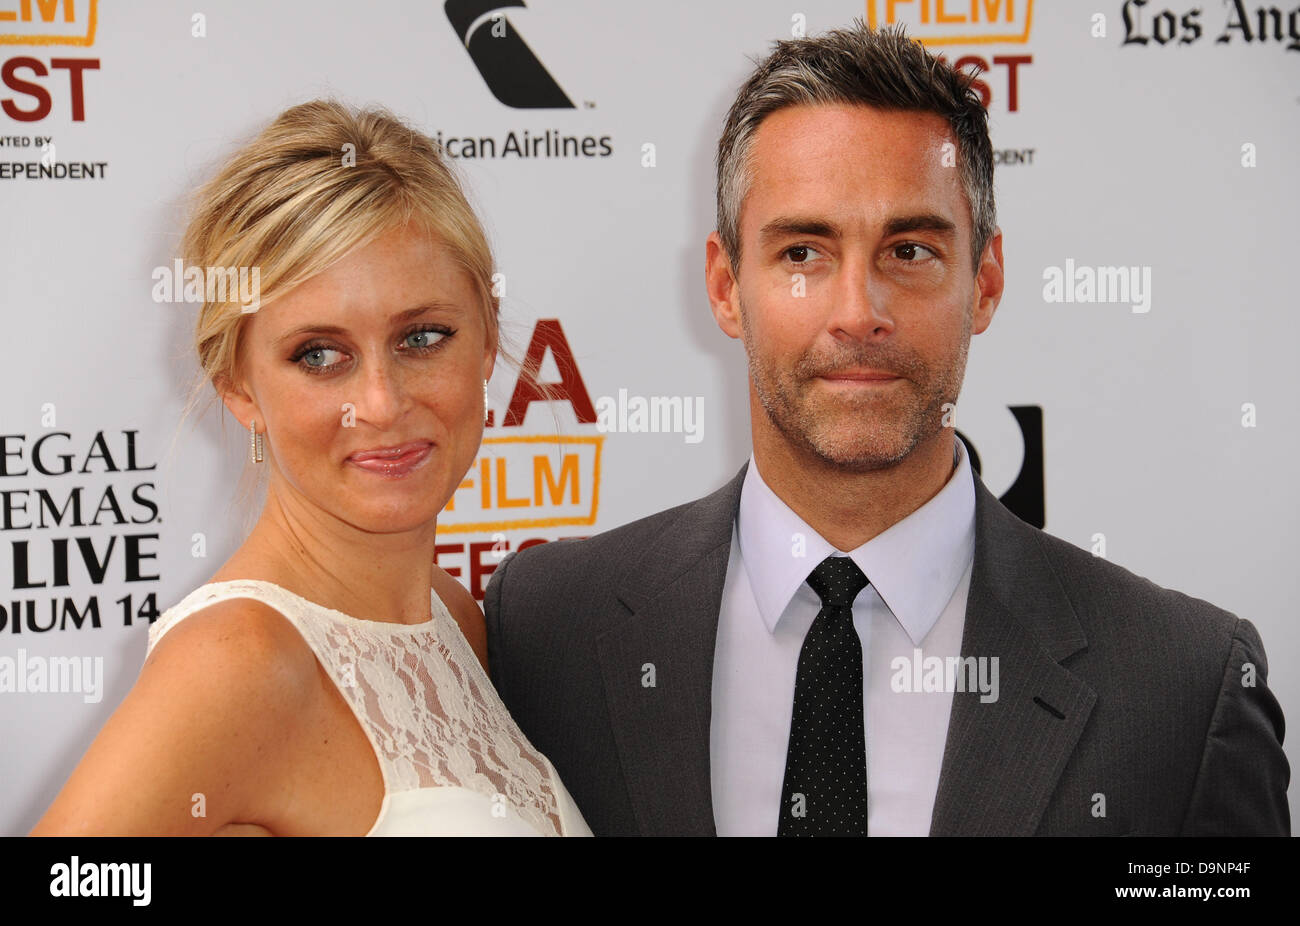 Los Angeles, California, U.S. June 23, 2013. Jay Harrington, Monica Richards  attending the Los Angeles Premiere of ''The Way, Way Back'' held at the  Regal Cinemas at L.A. Live in Los Angeles.